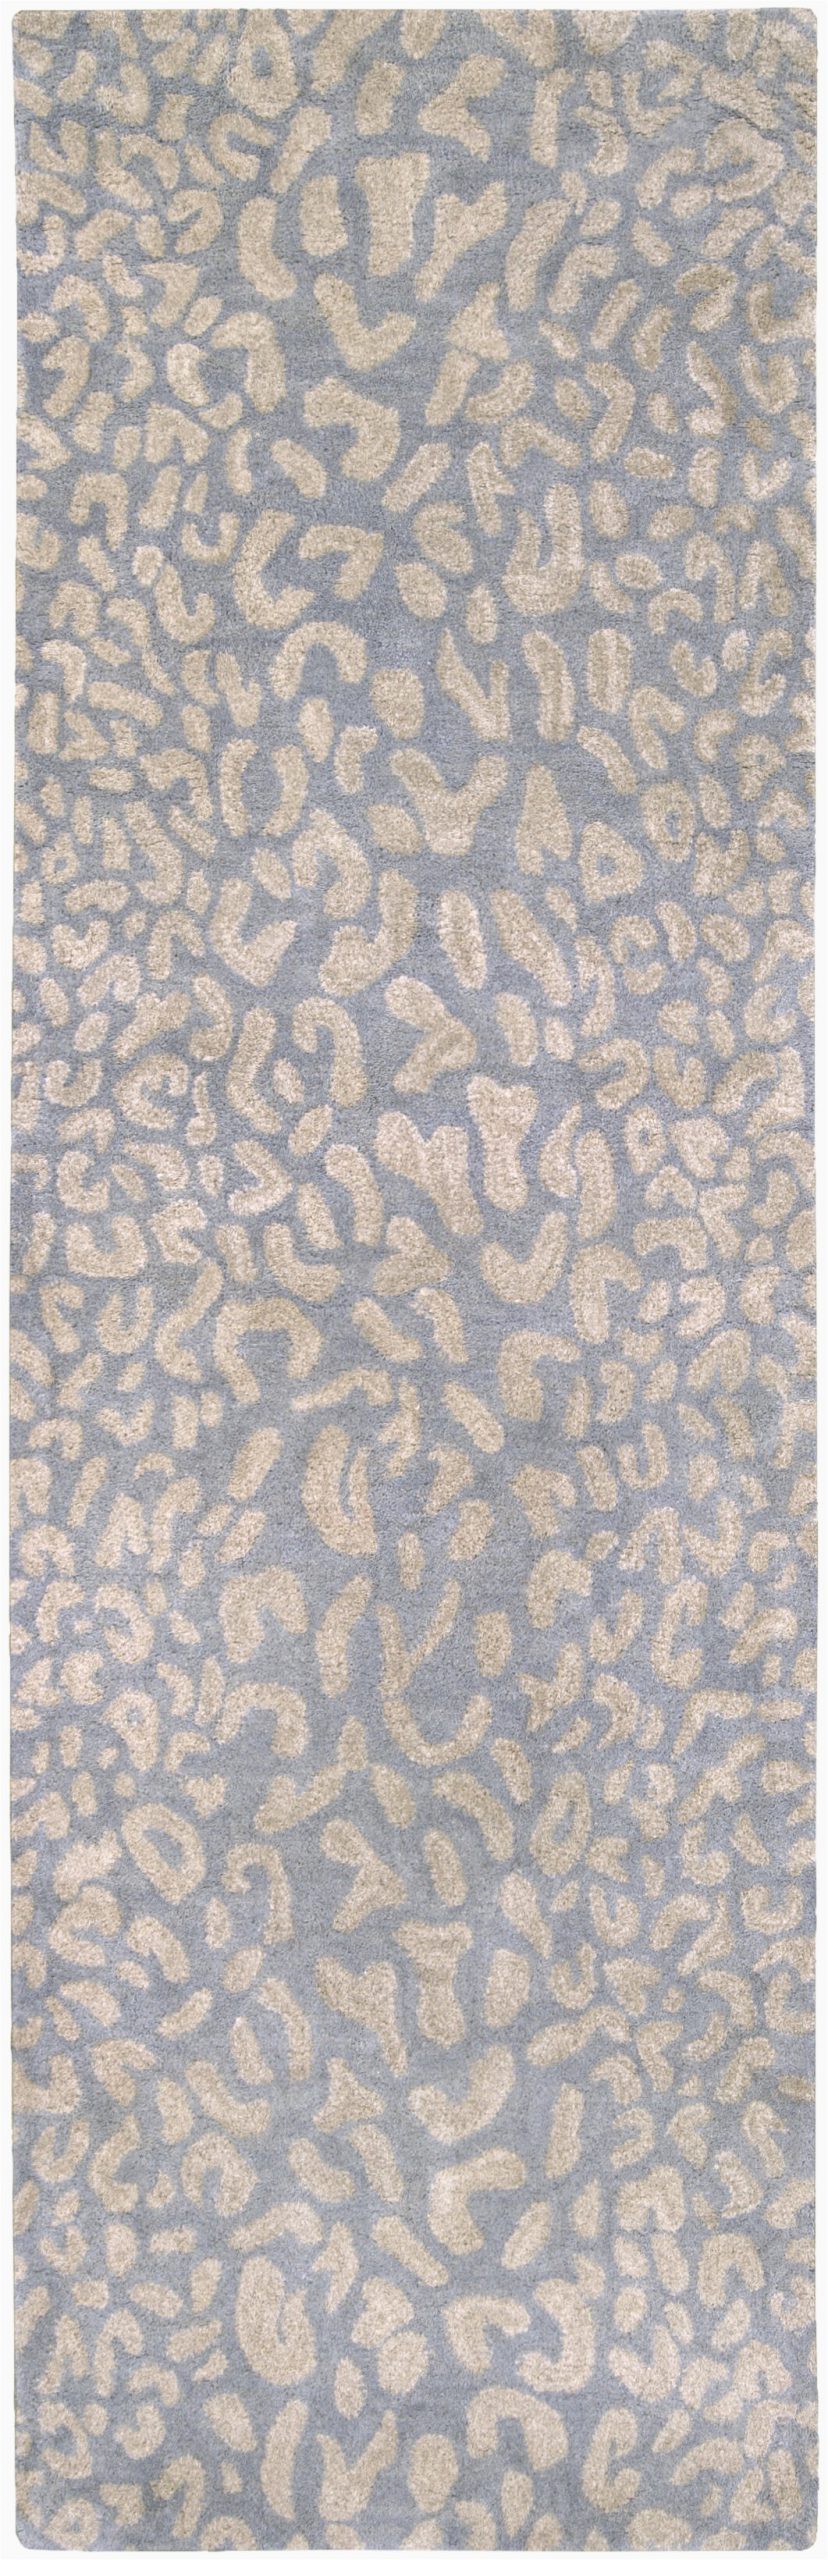 Round Animal Print area Rugs Animal Print area Rugs You Ll Love In 2020